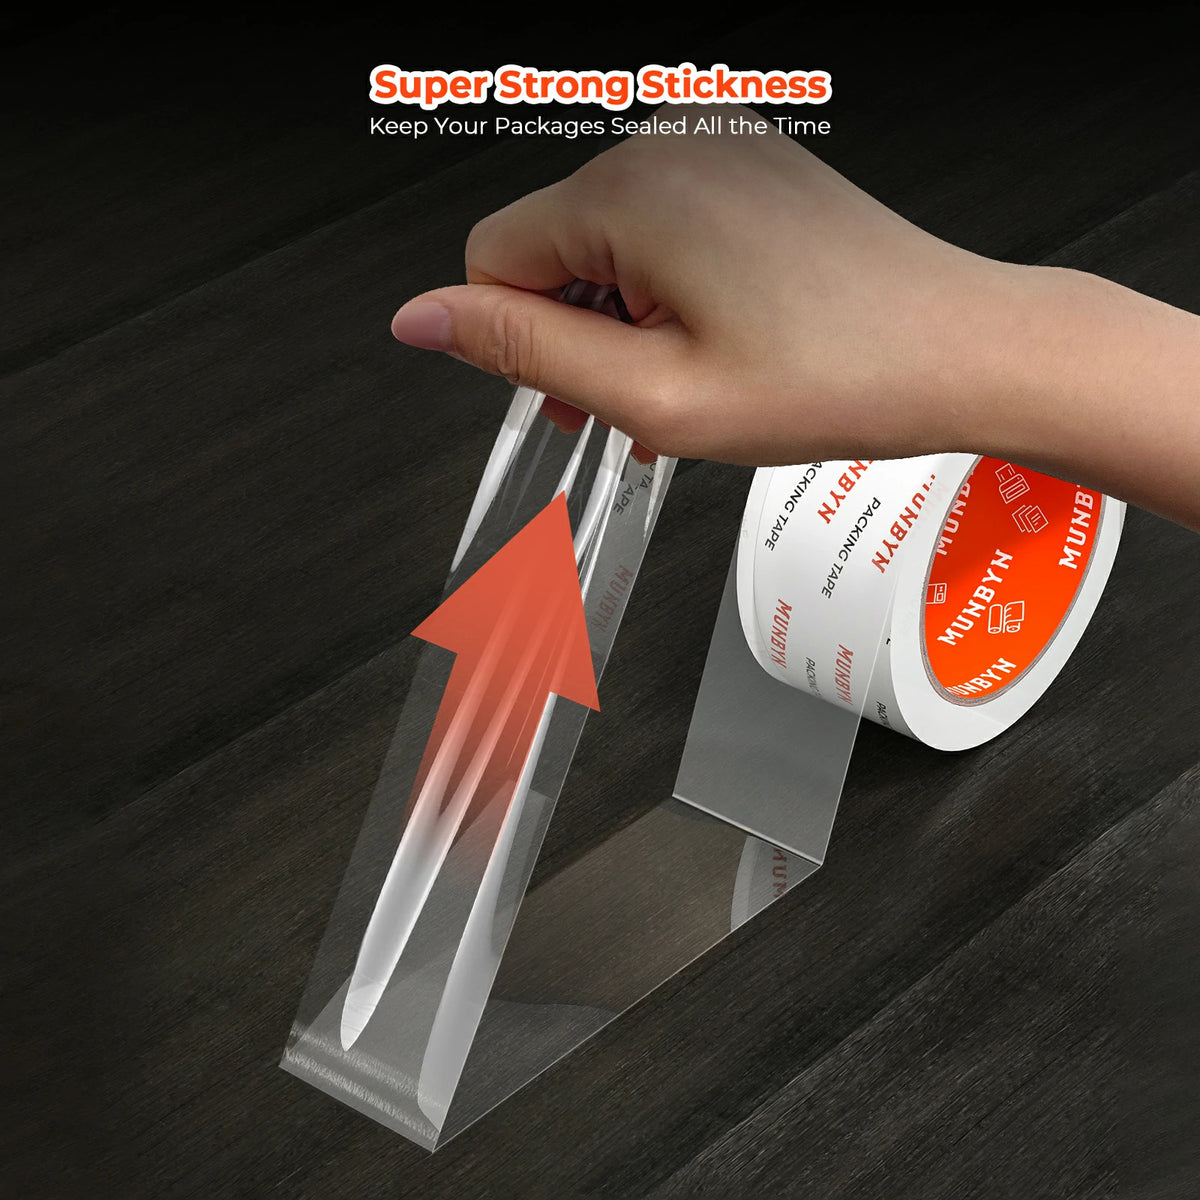 MUNBYN Clear Heavy-Duty Shipping Tape is made from a premium blend of materials, featuring an aggressive adhesive.